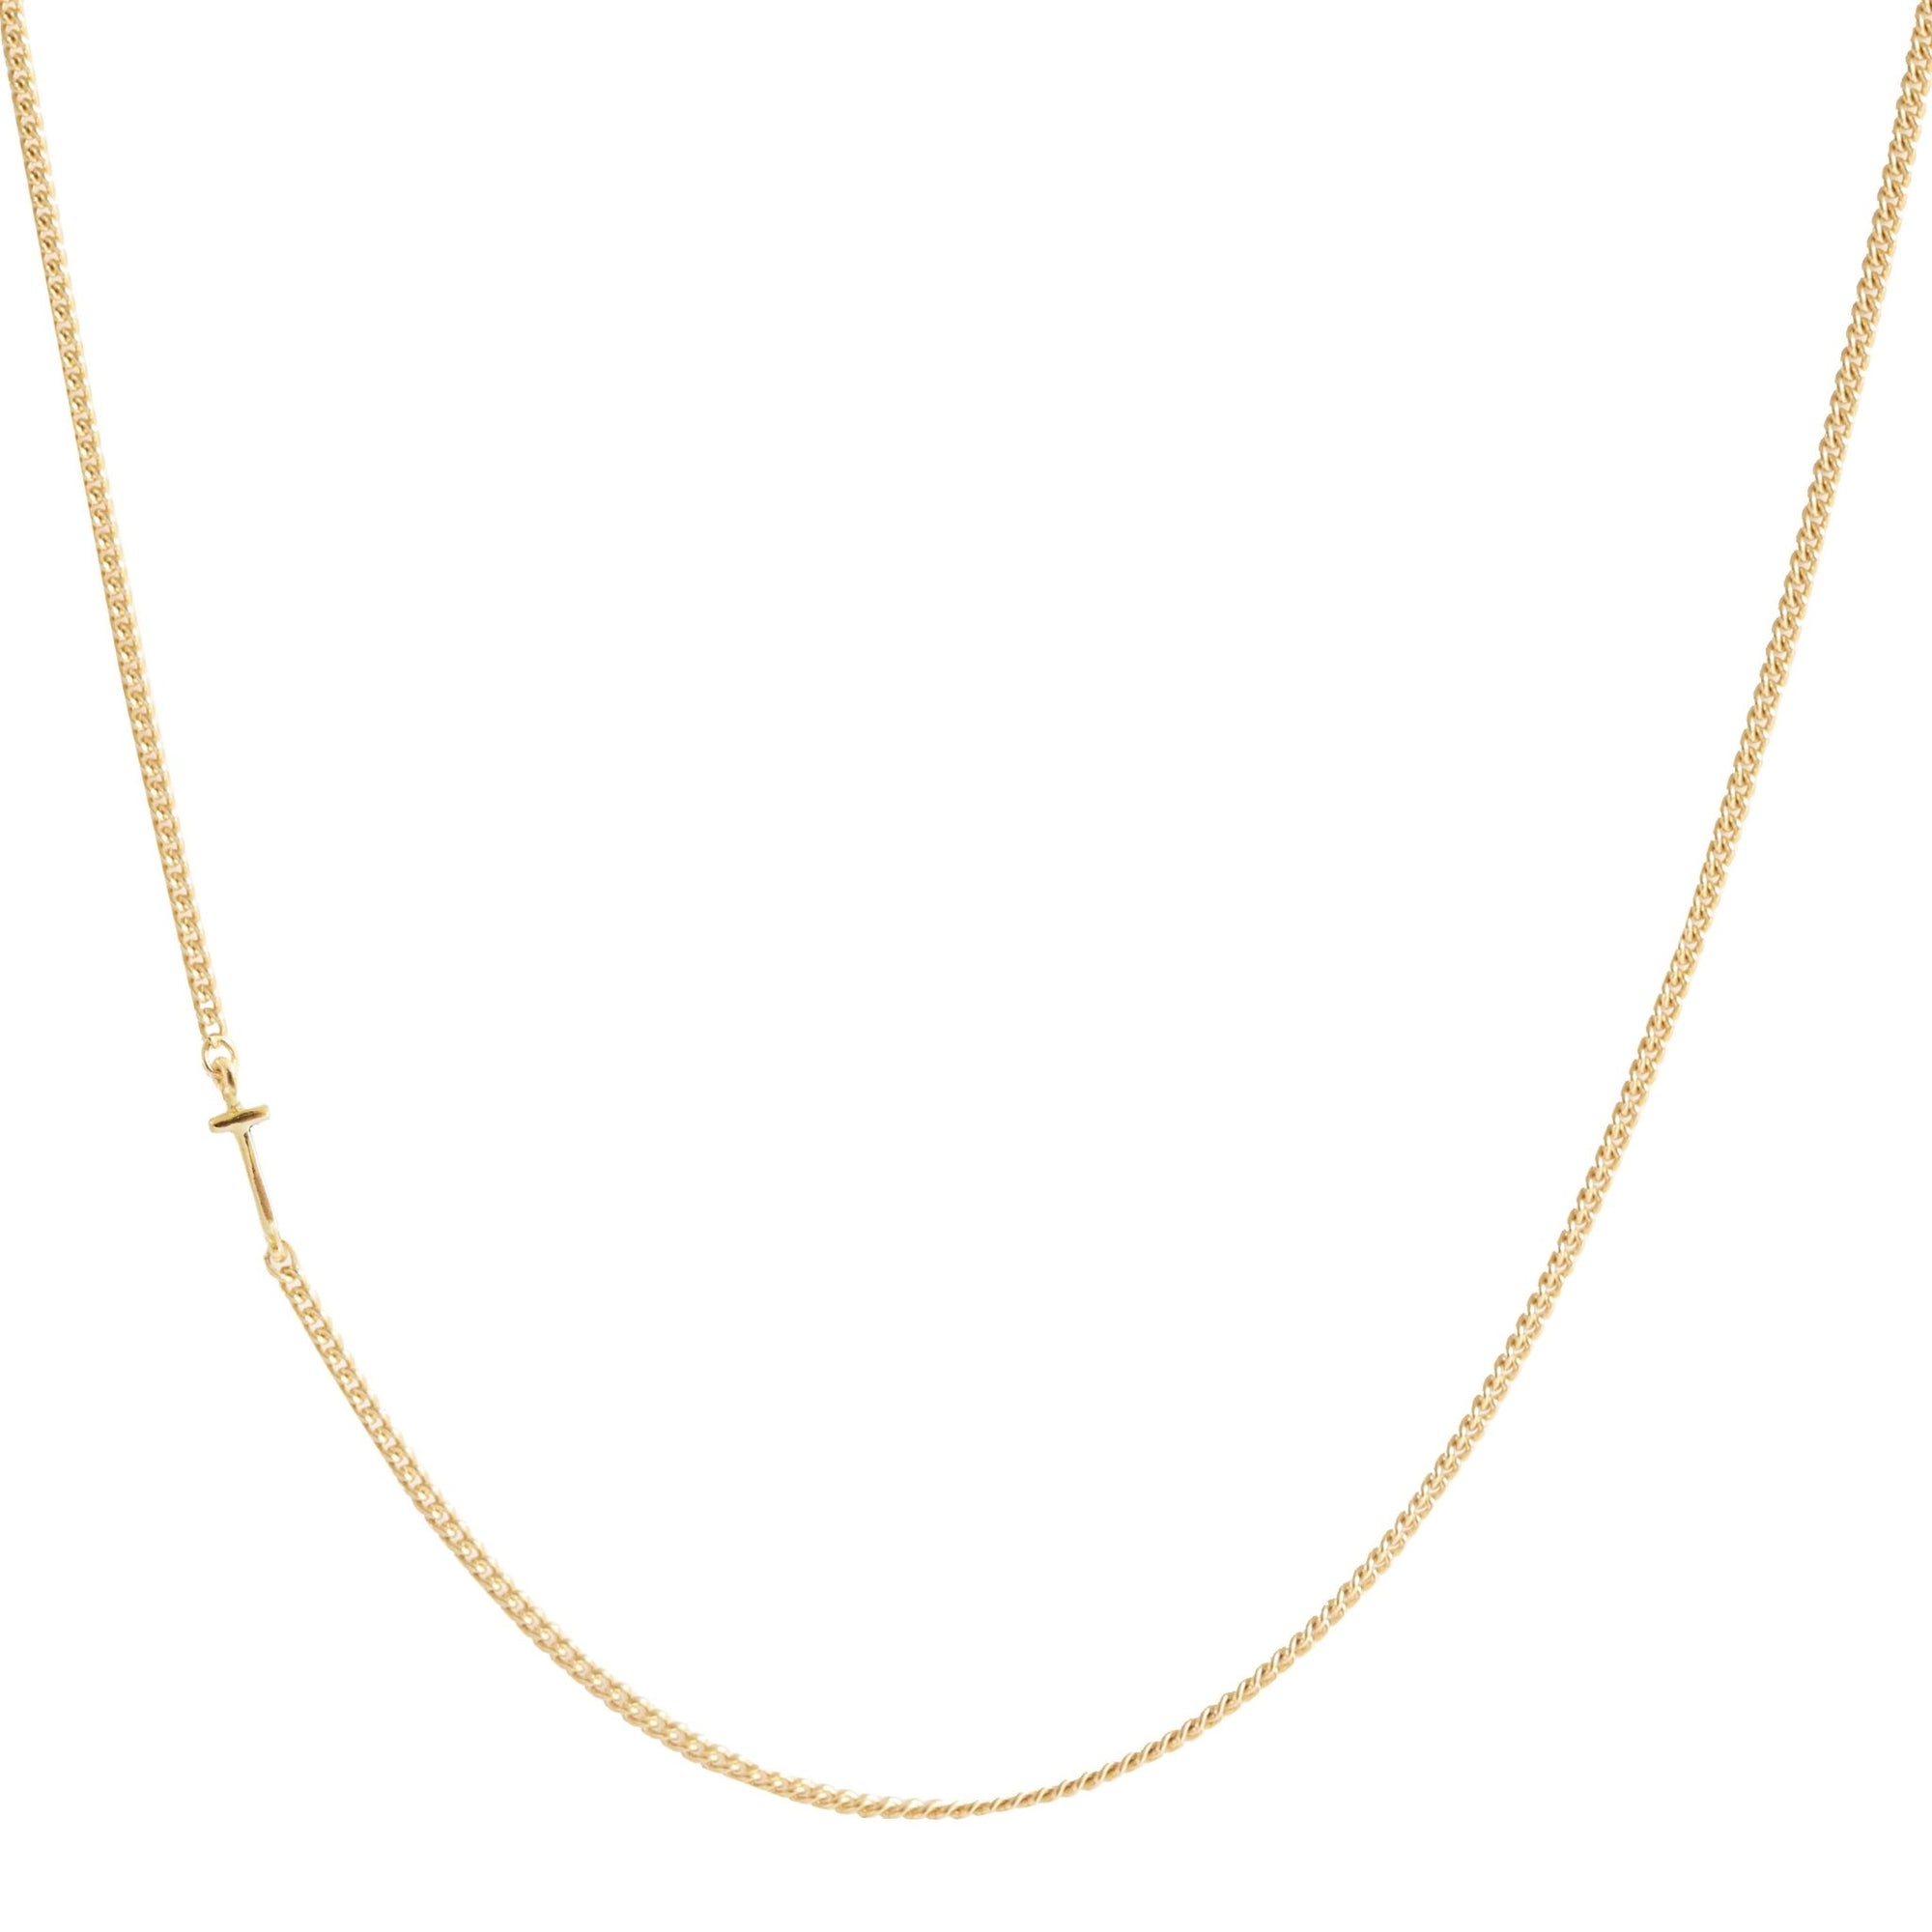 NOTABLE OFFSET INITIAL NECKLACE - T - GOLD - SO PRETTY CARA COTTER